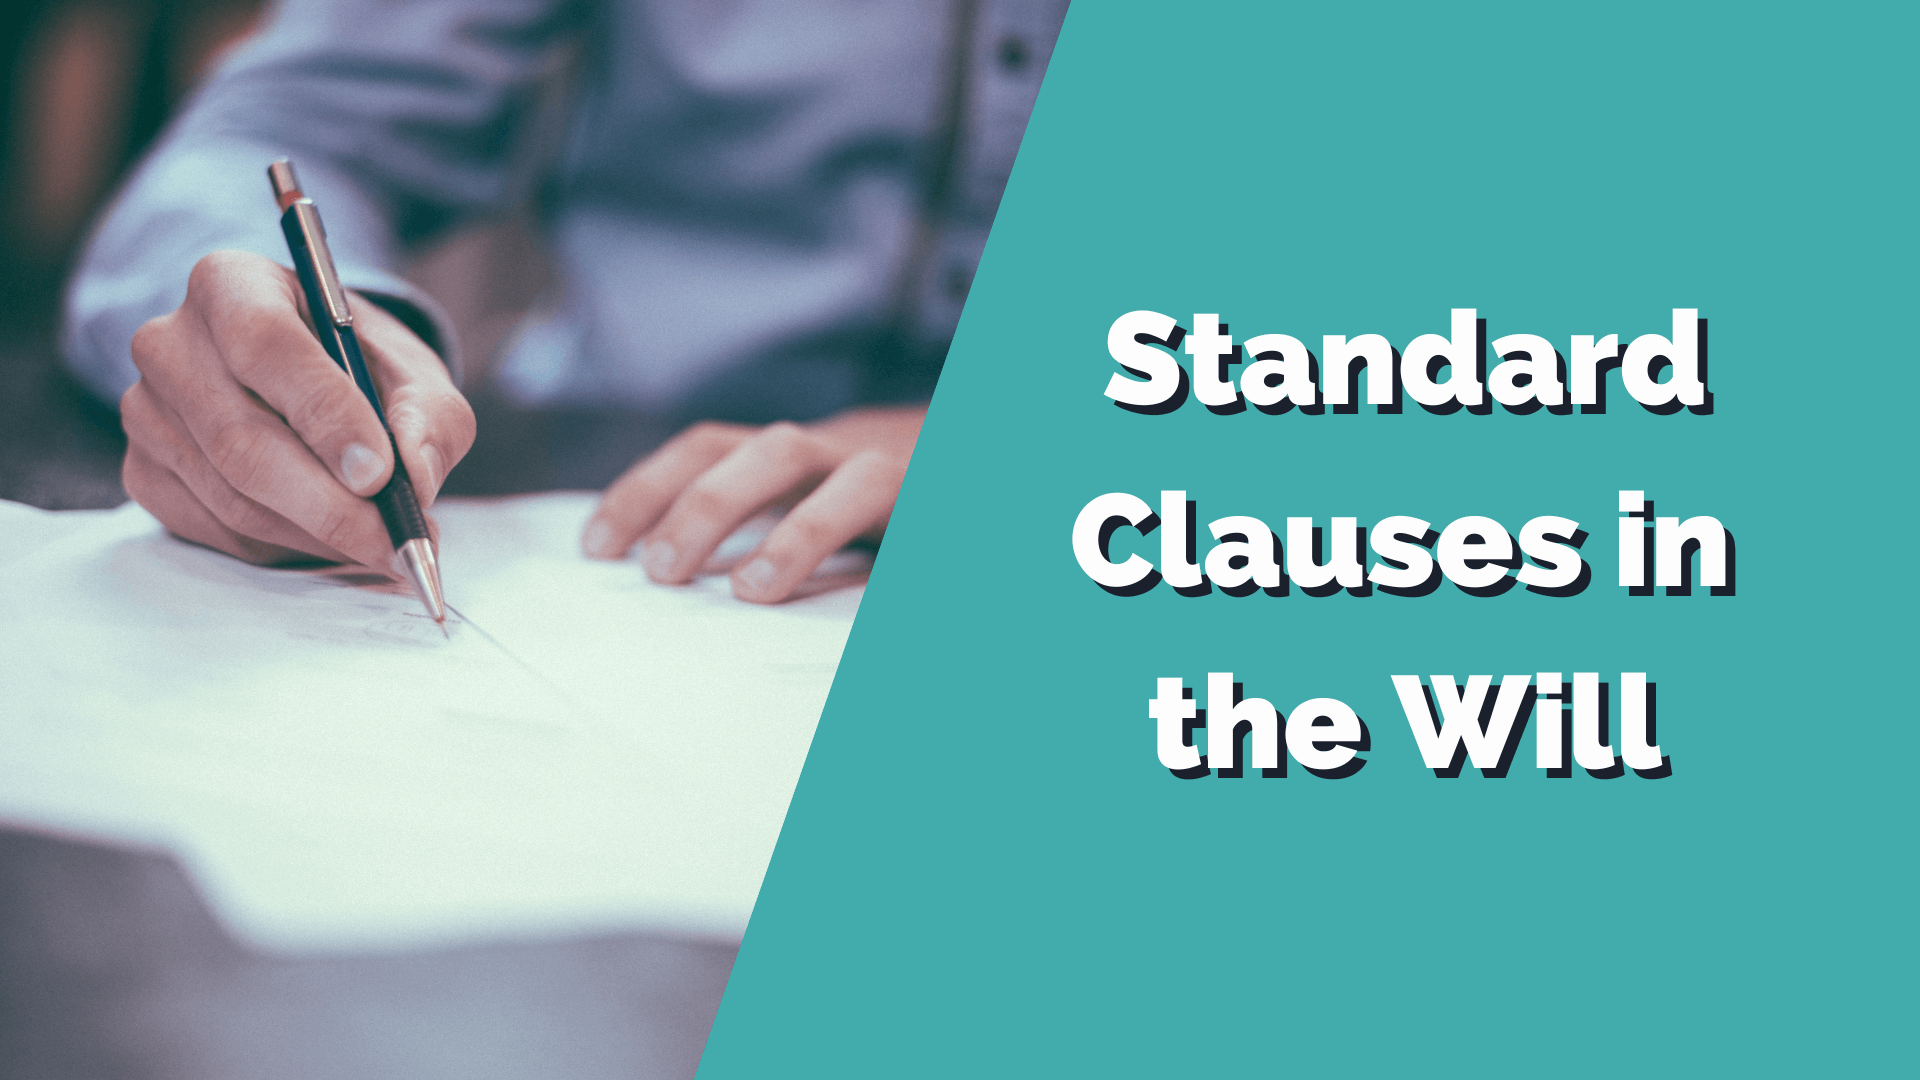 Standard clauses in the Will